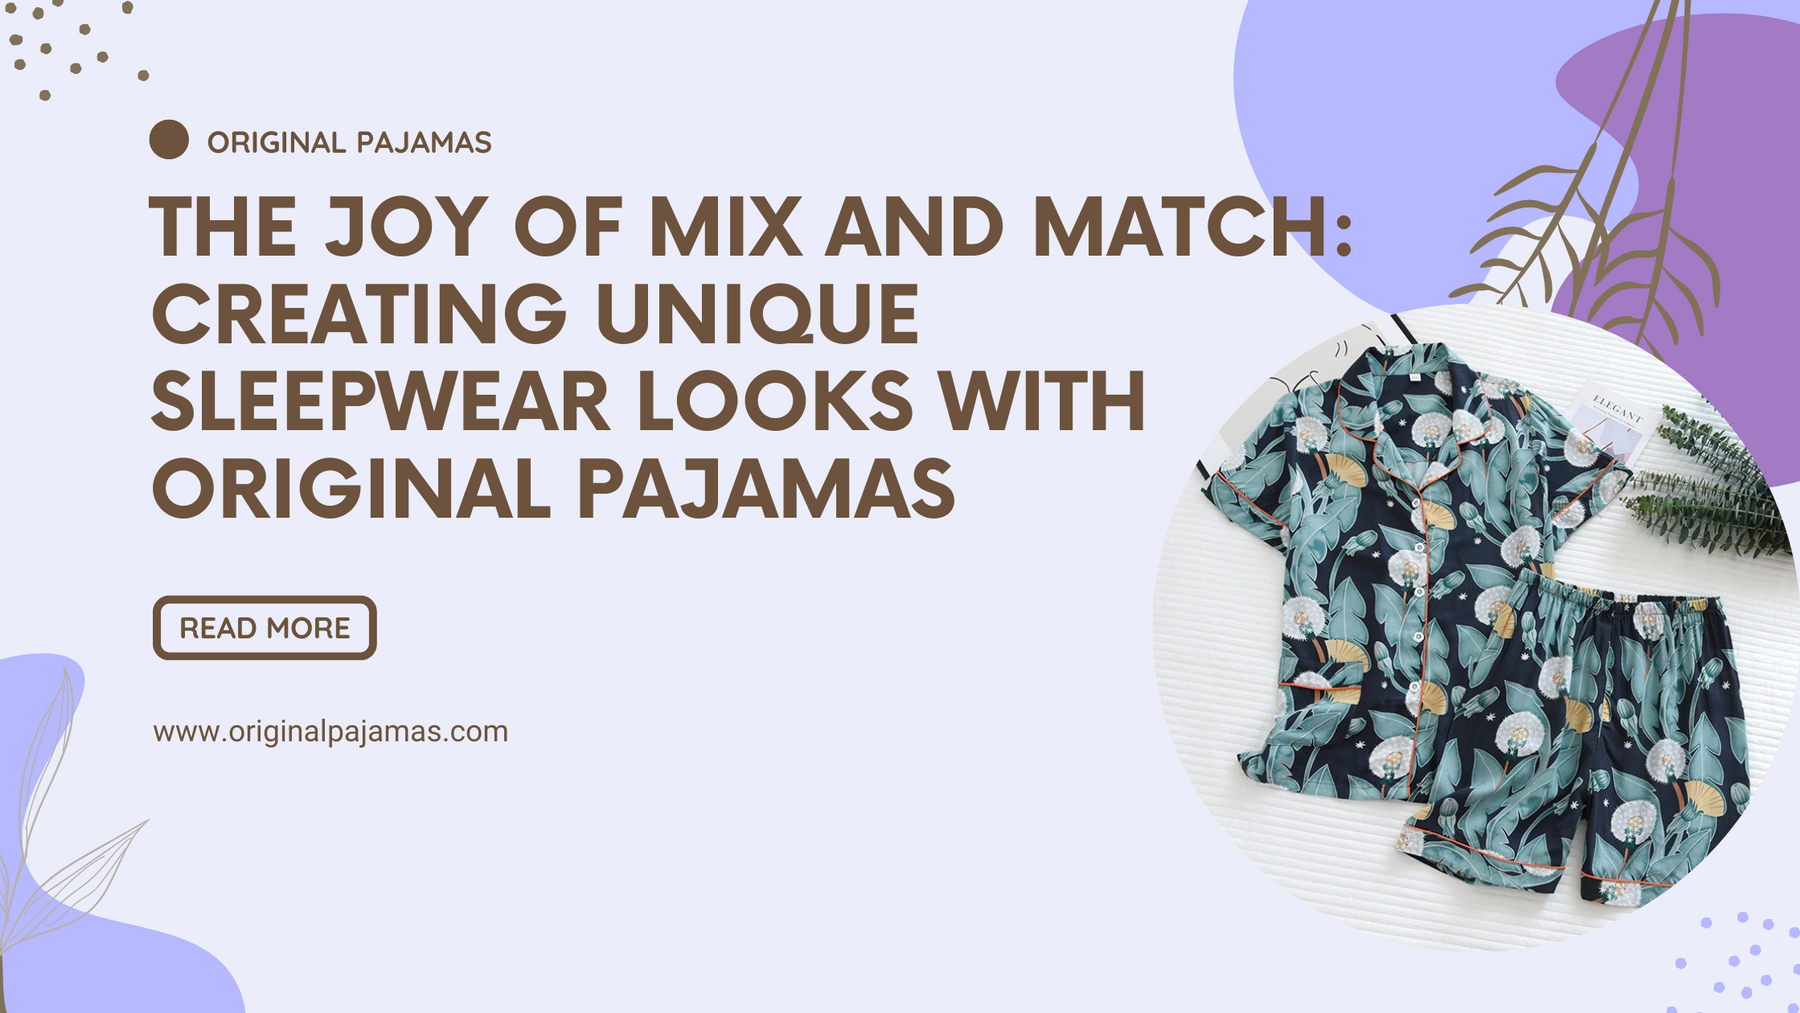 The Joy of Mix and Match: Creating Unique Sleepwear Looks with Original Pajamas